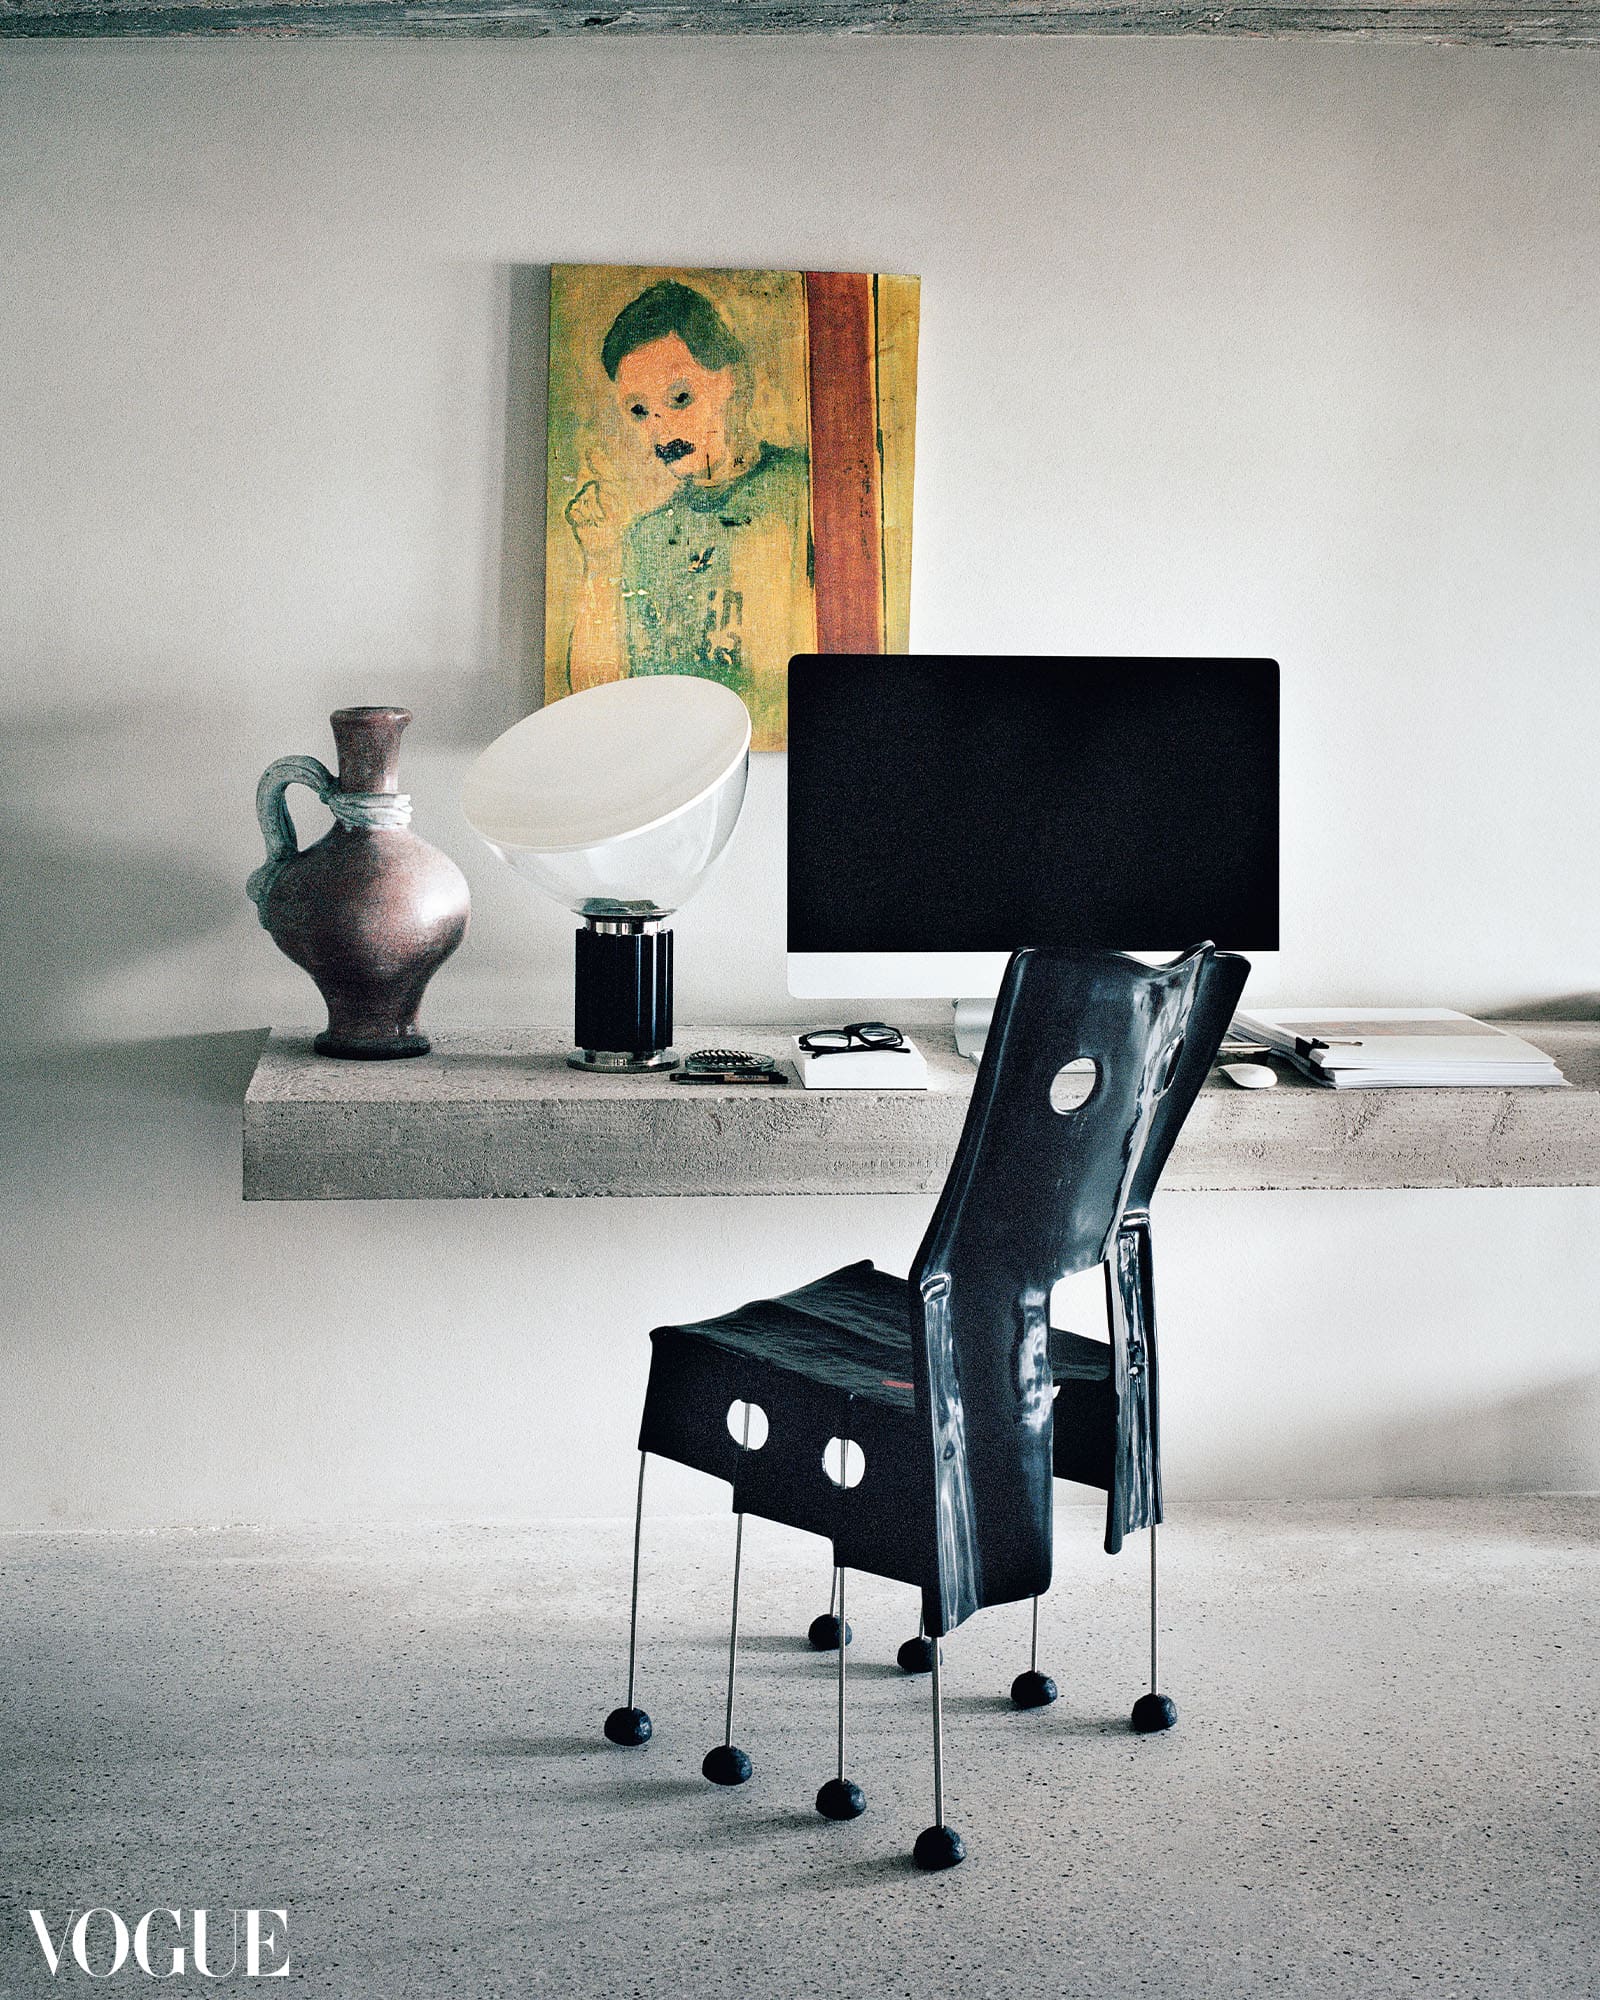 A Georges Jouve vase, Castiglioni lamp, Tim Bruer painting, and Gaetano Pesce chair.